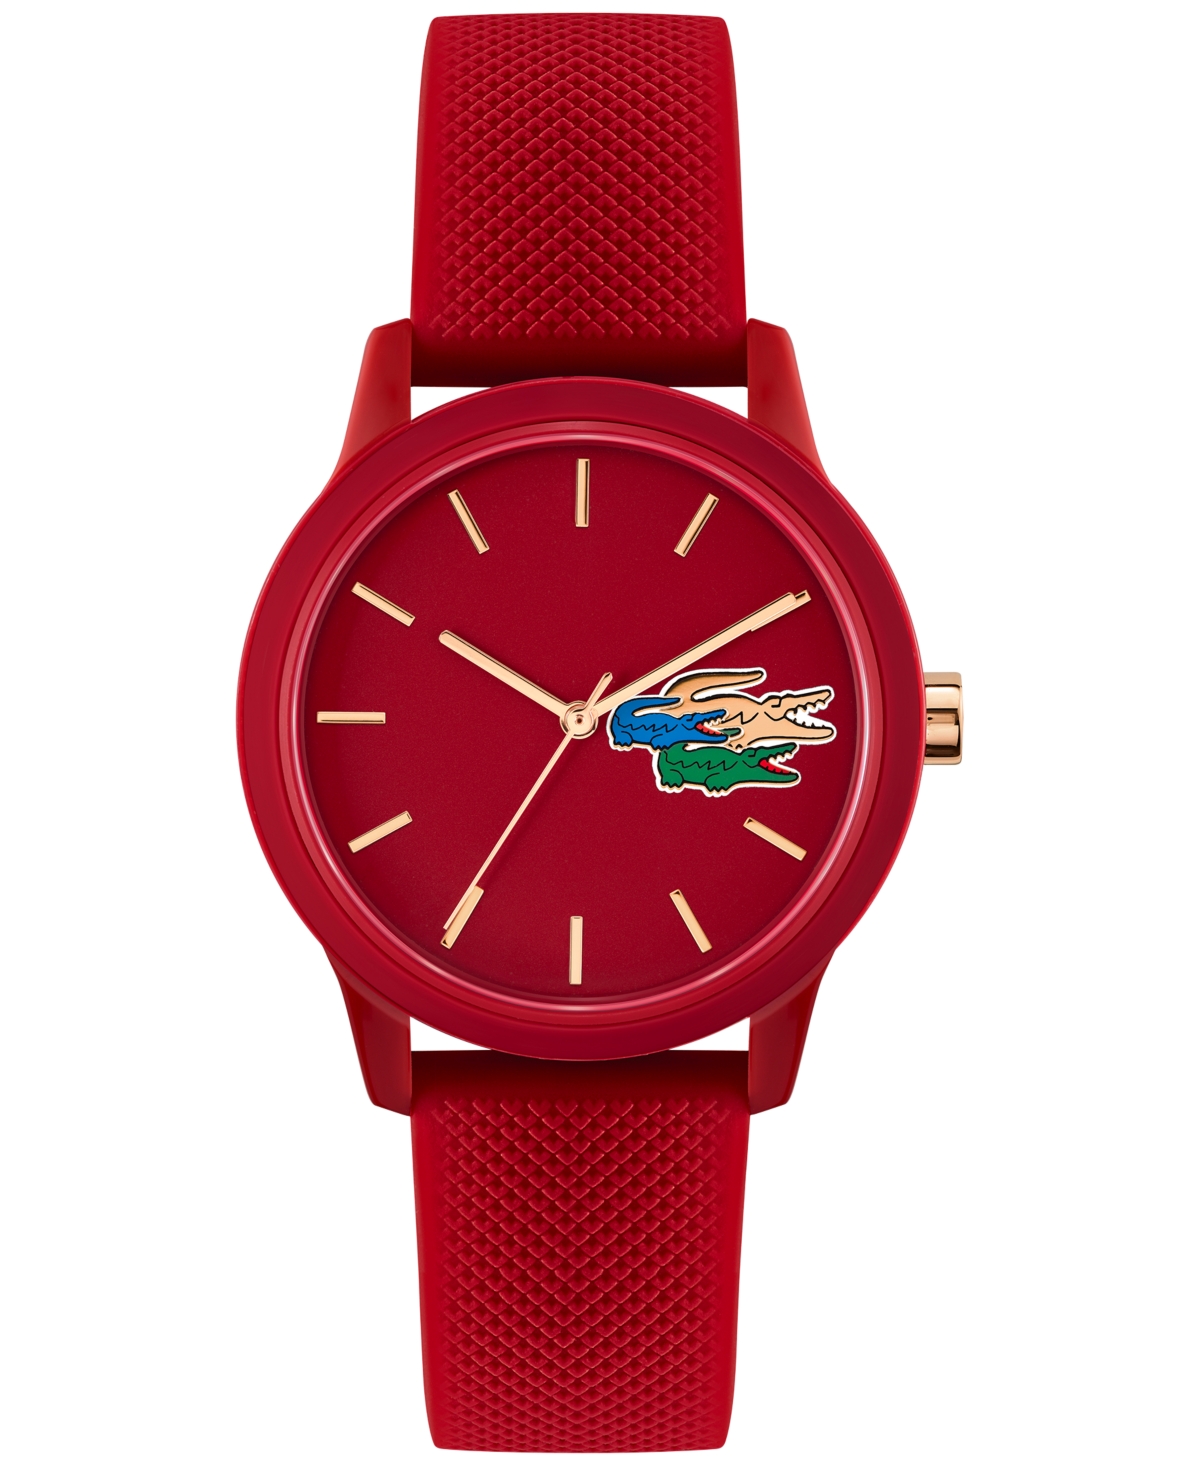 Unisex Lacoste L.12.12 Red Silicone Strap Watch 36mm - Red